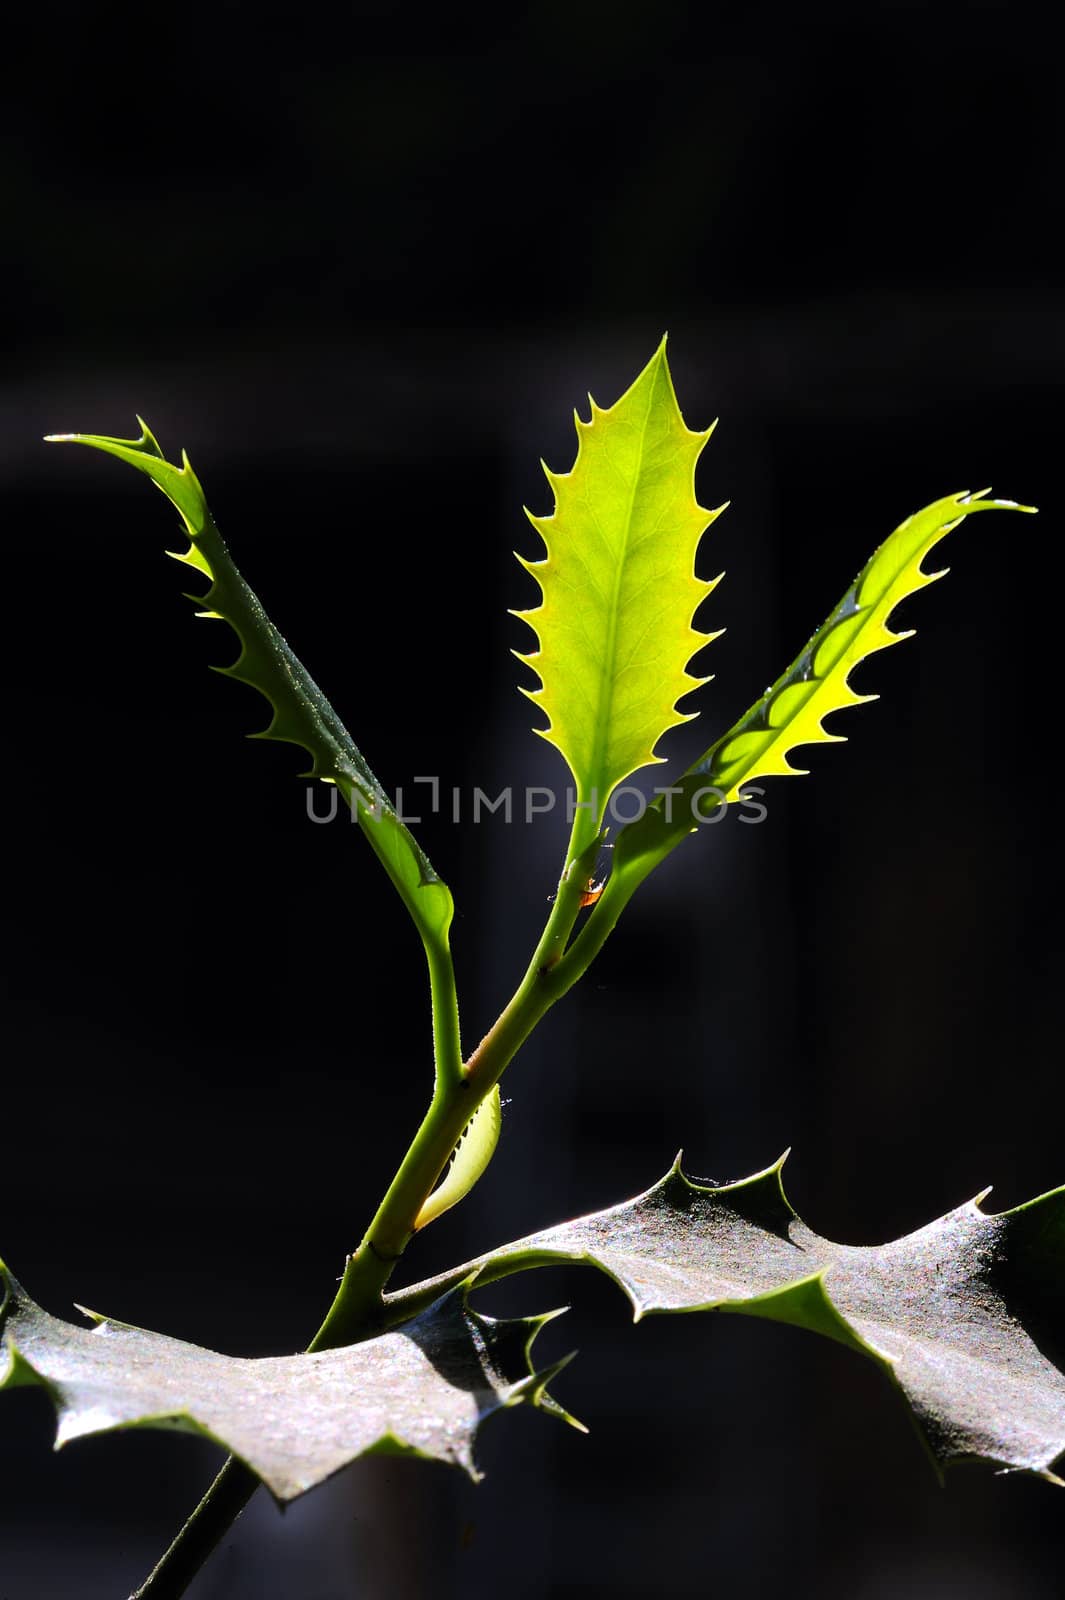 New holly leaves by Bateleur